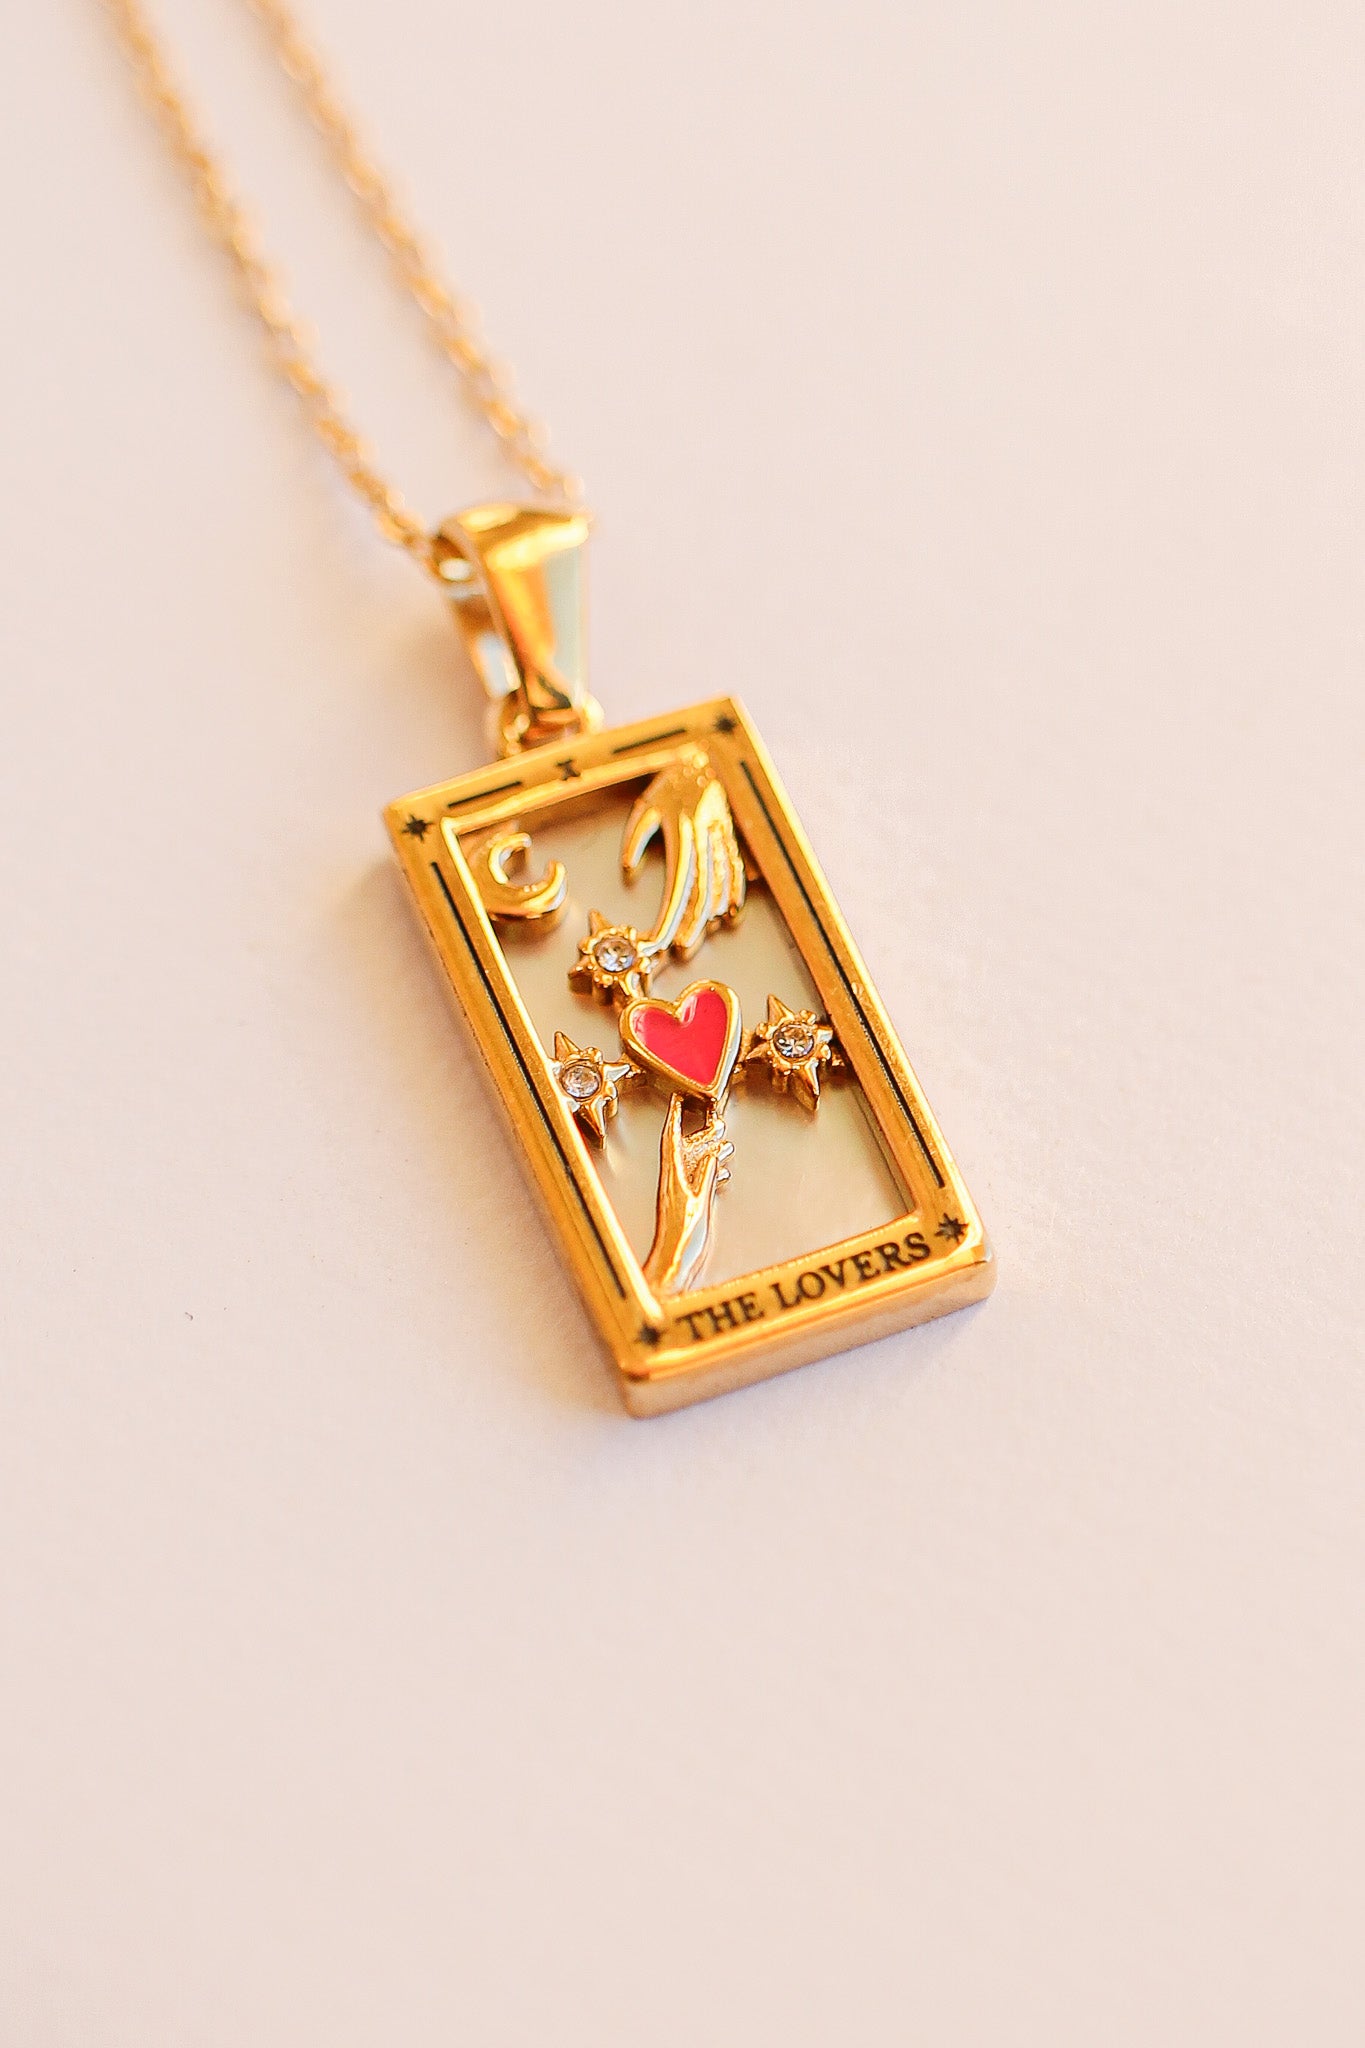 "The Lovers" Necklace